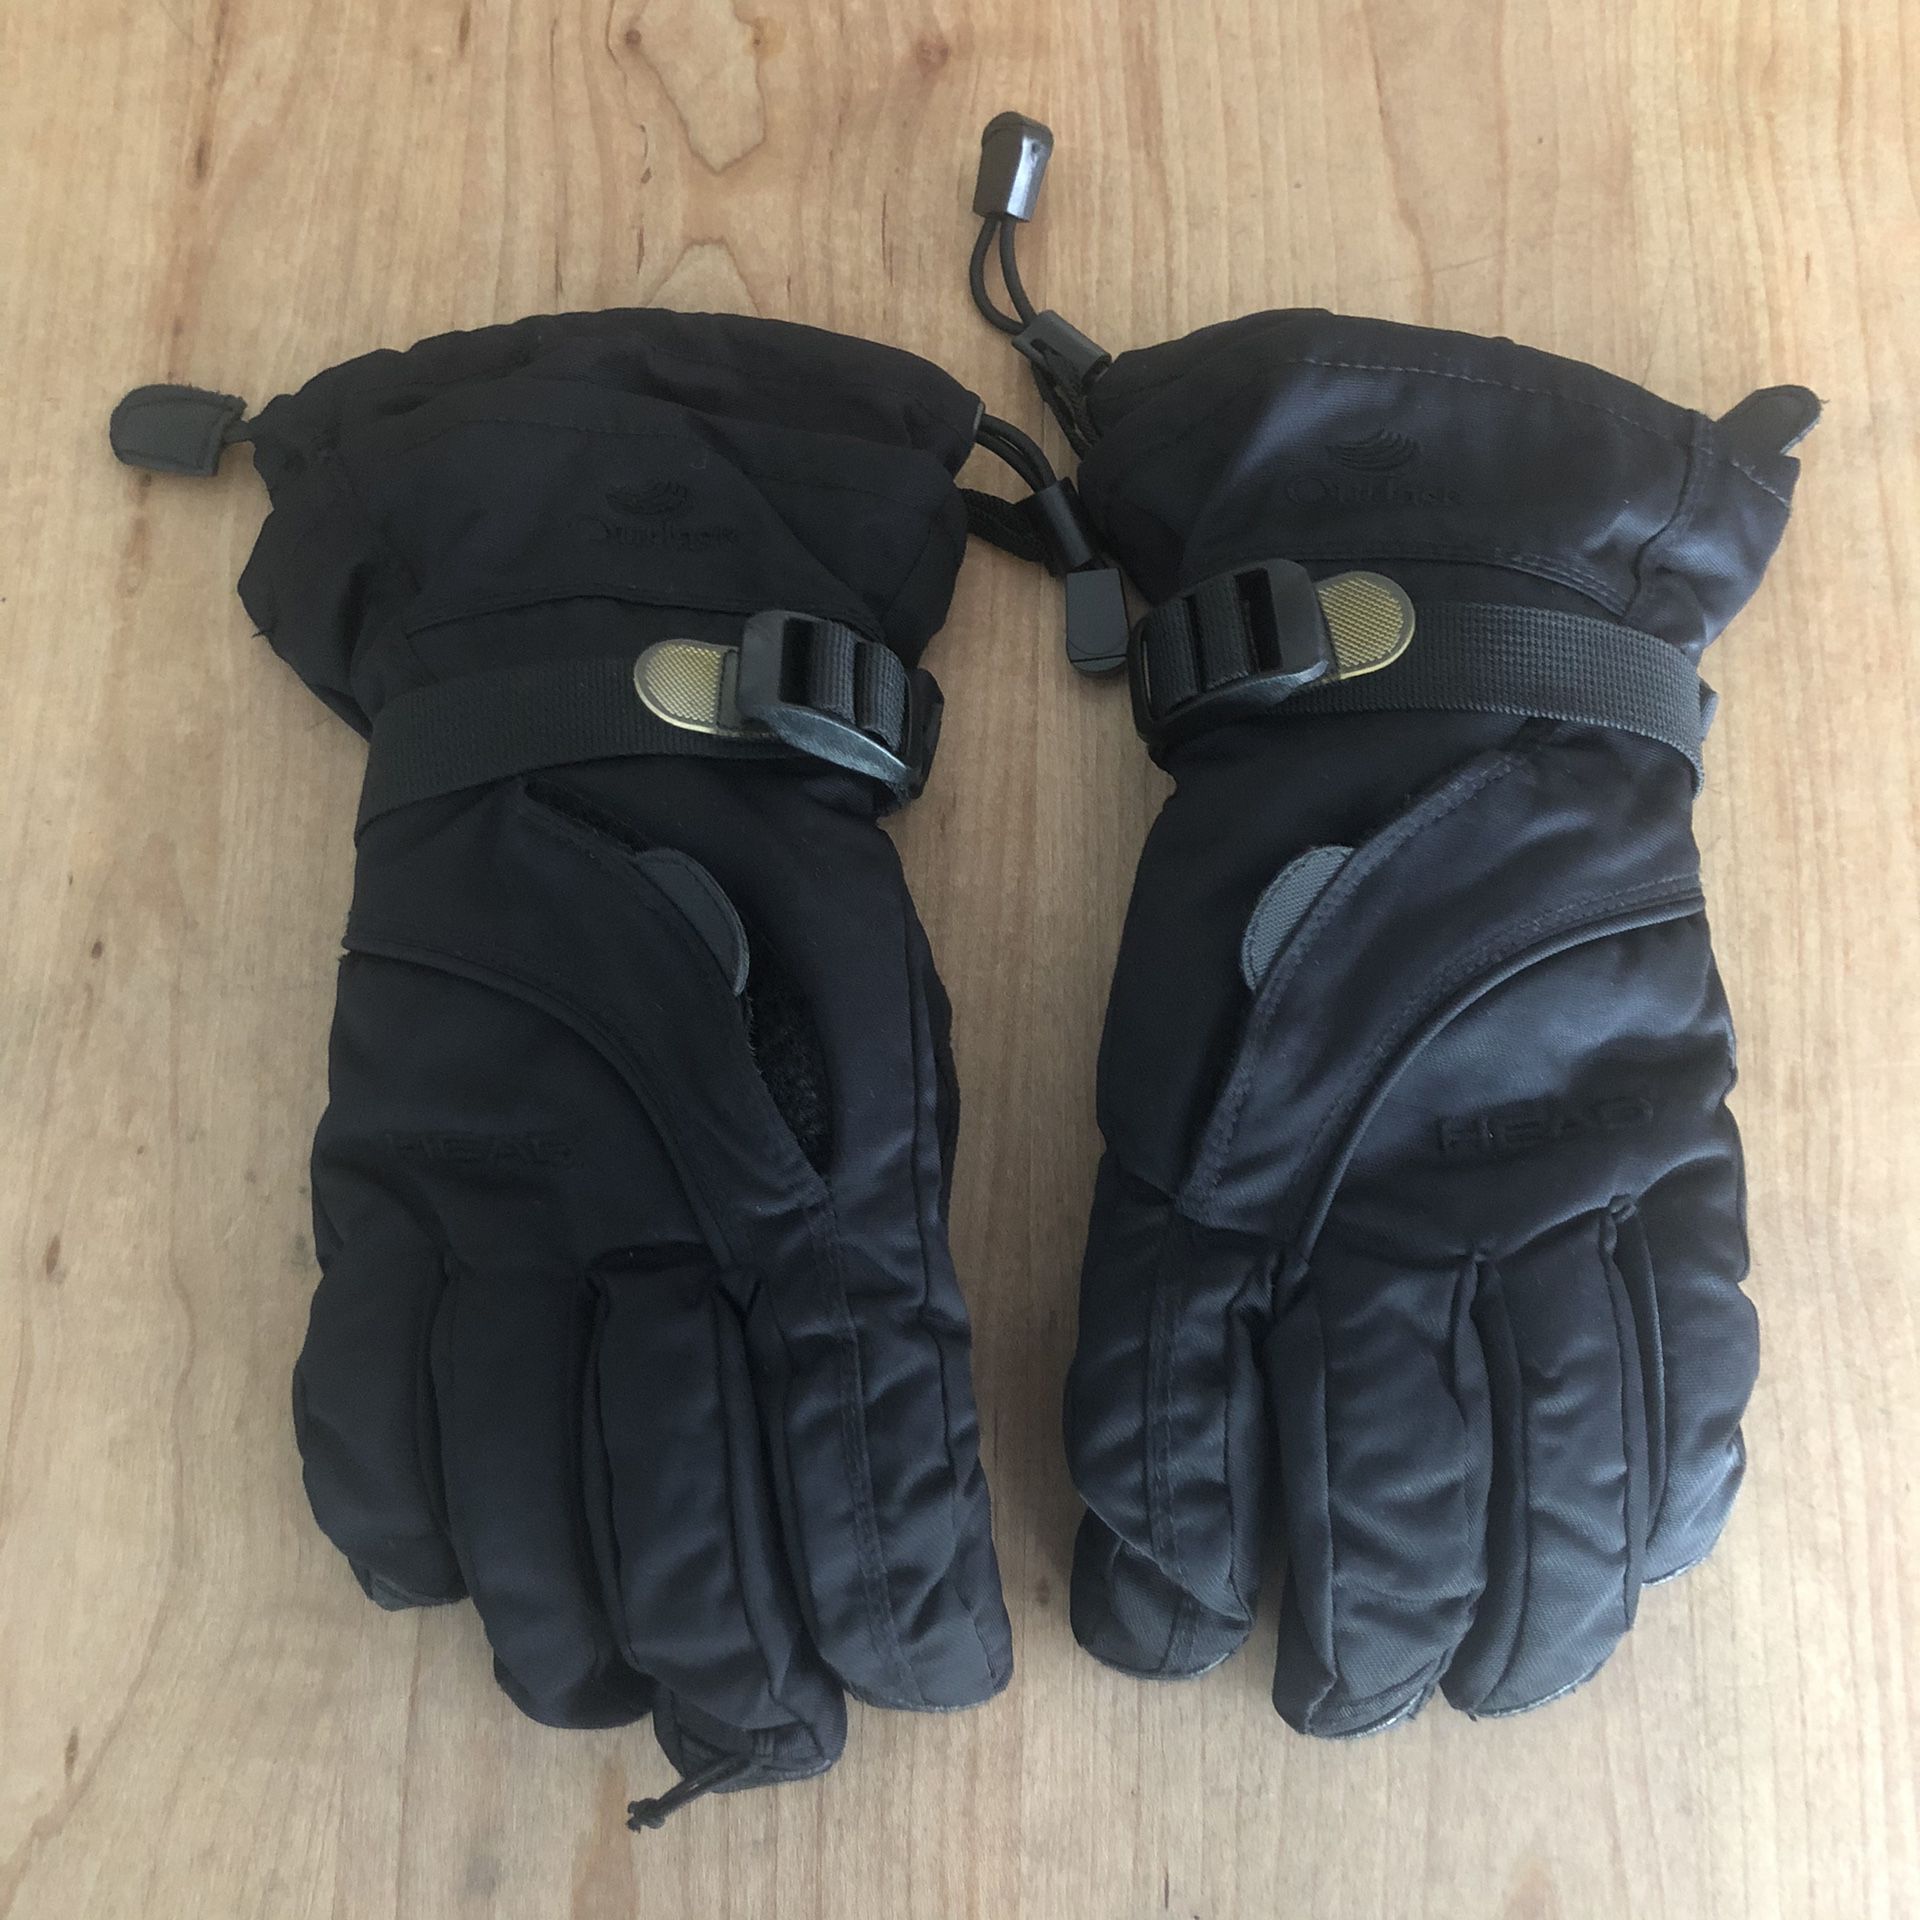 Head Ski Snowboard Gloves Youth Large Excellent Condition!